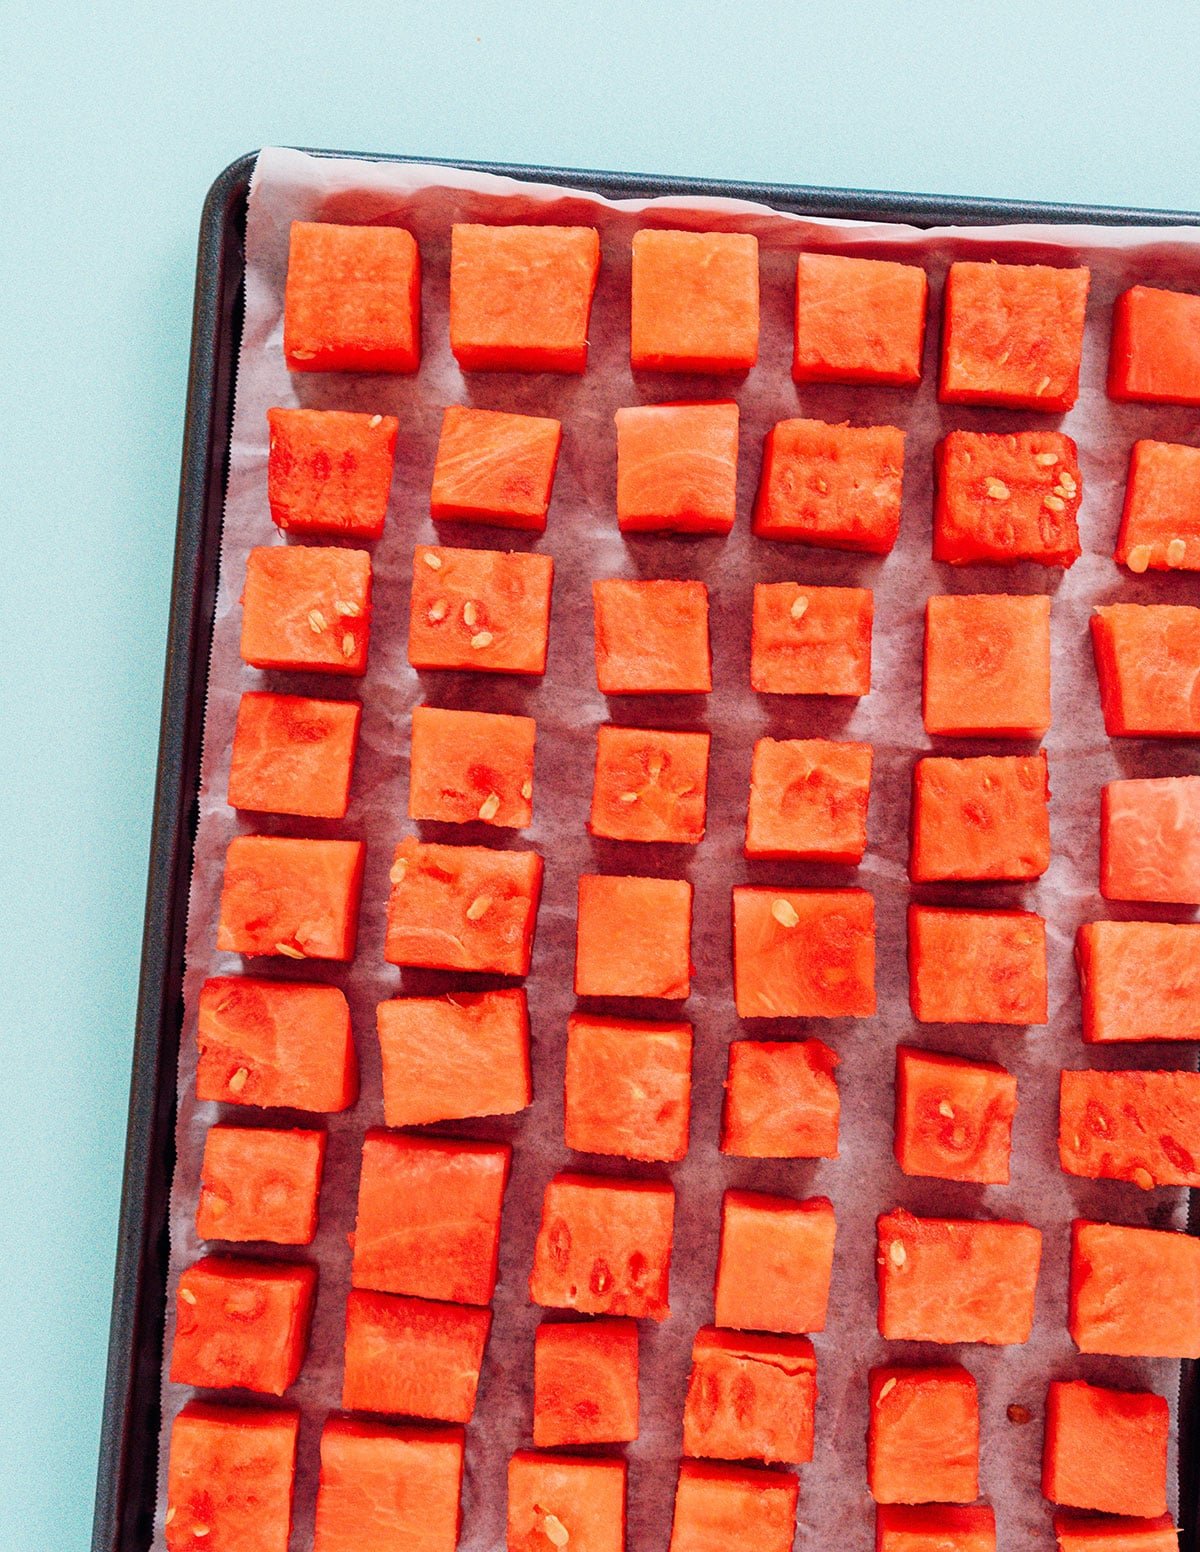 A parchment-lined baking sheet filled with rows of cubed watermelon.